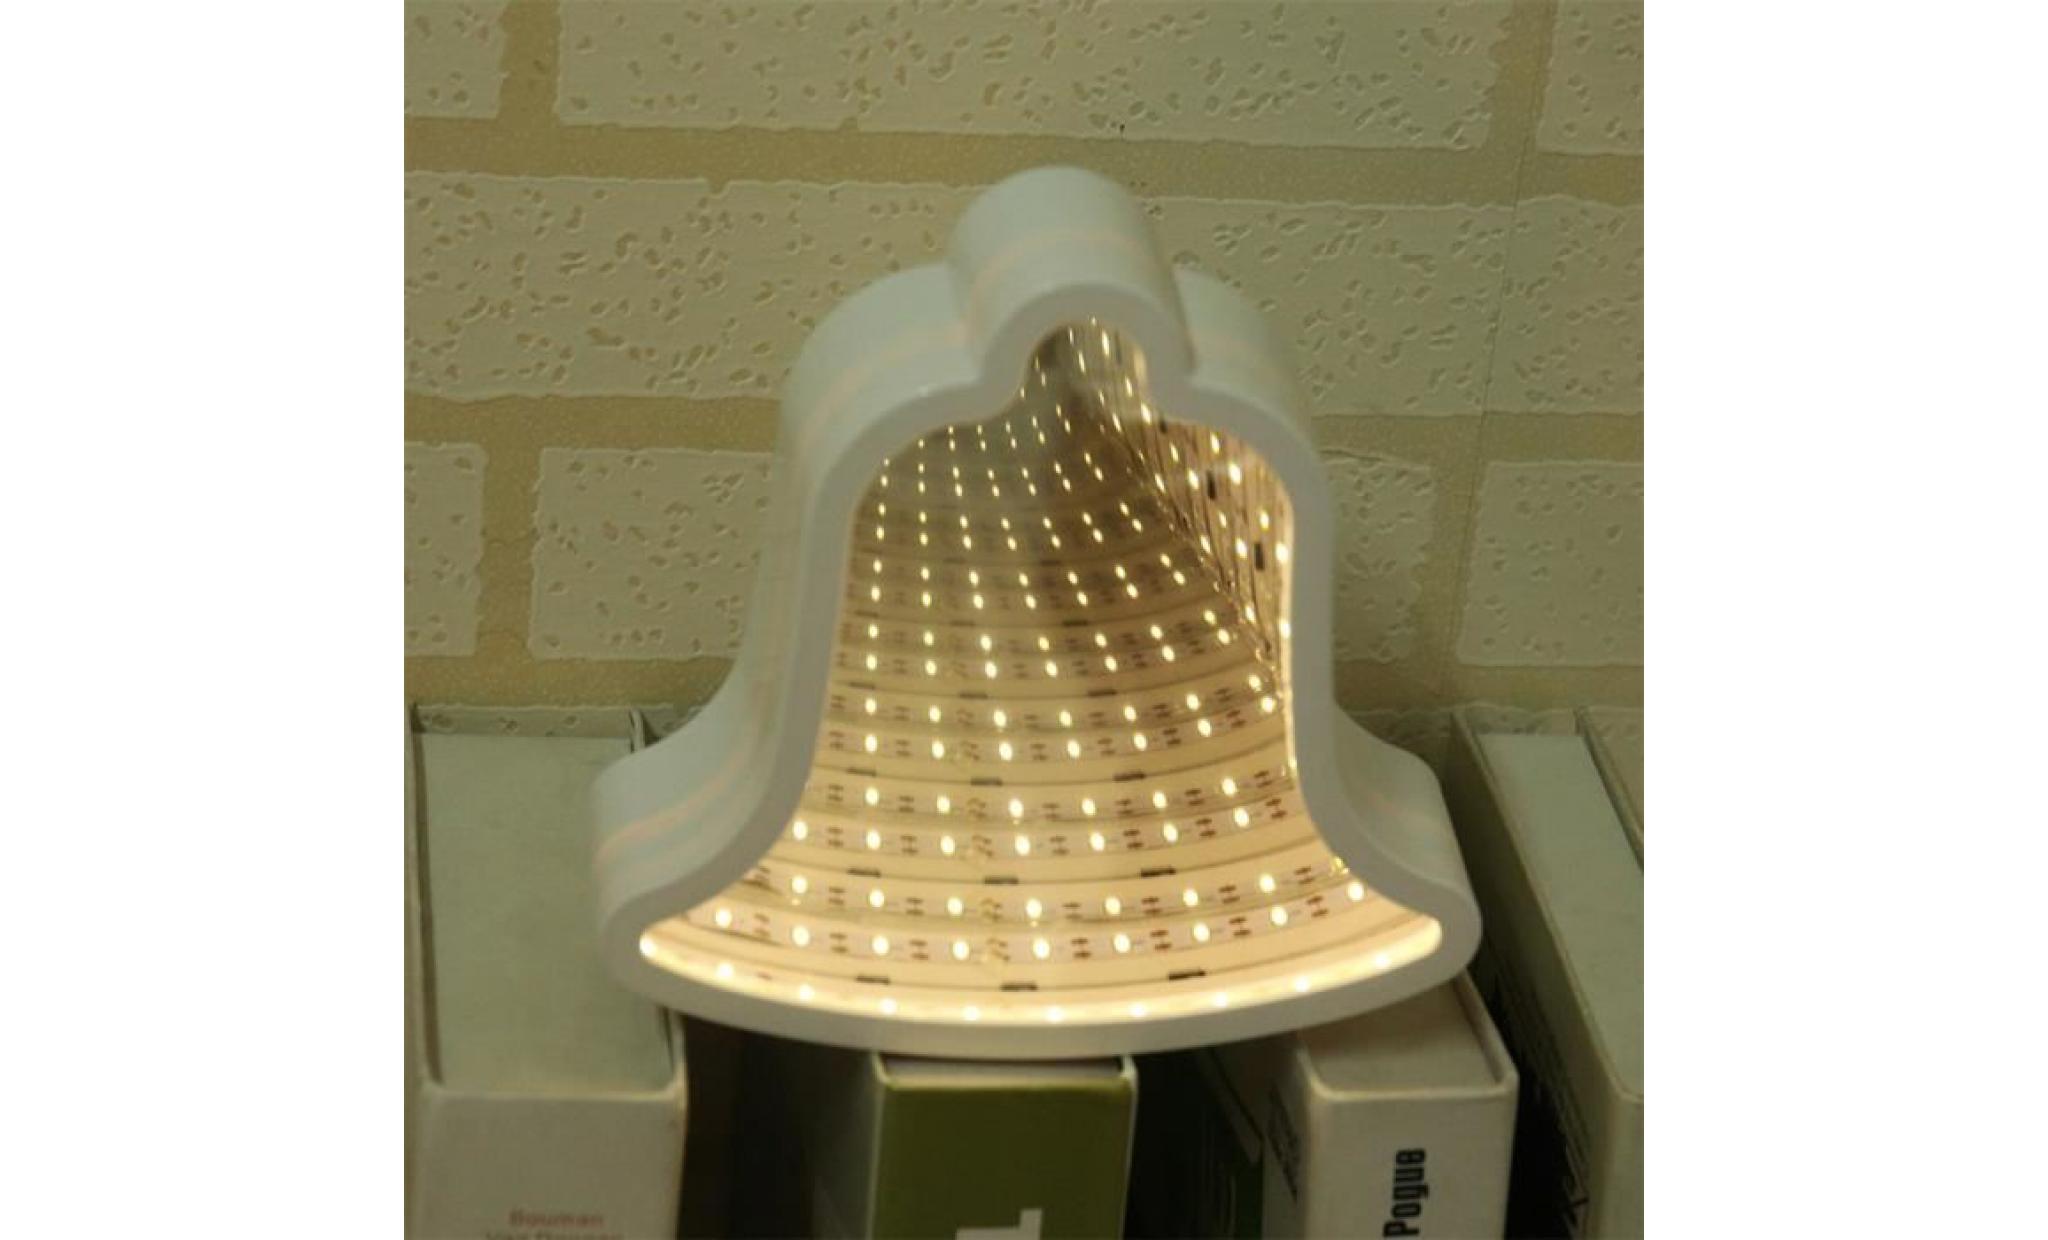 marquee led night light chambre tunnel modeling home décor batterie lampe mur sw2607 pas cher